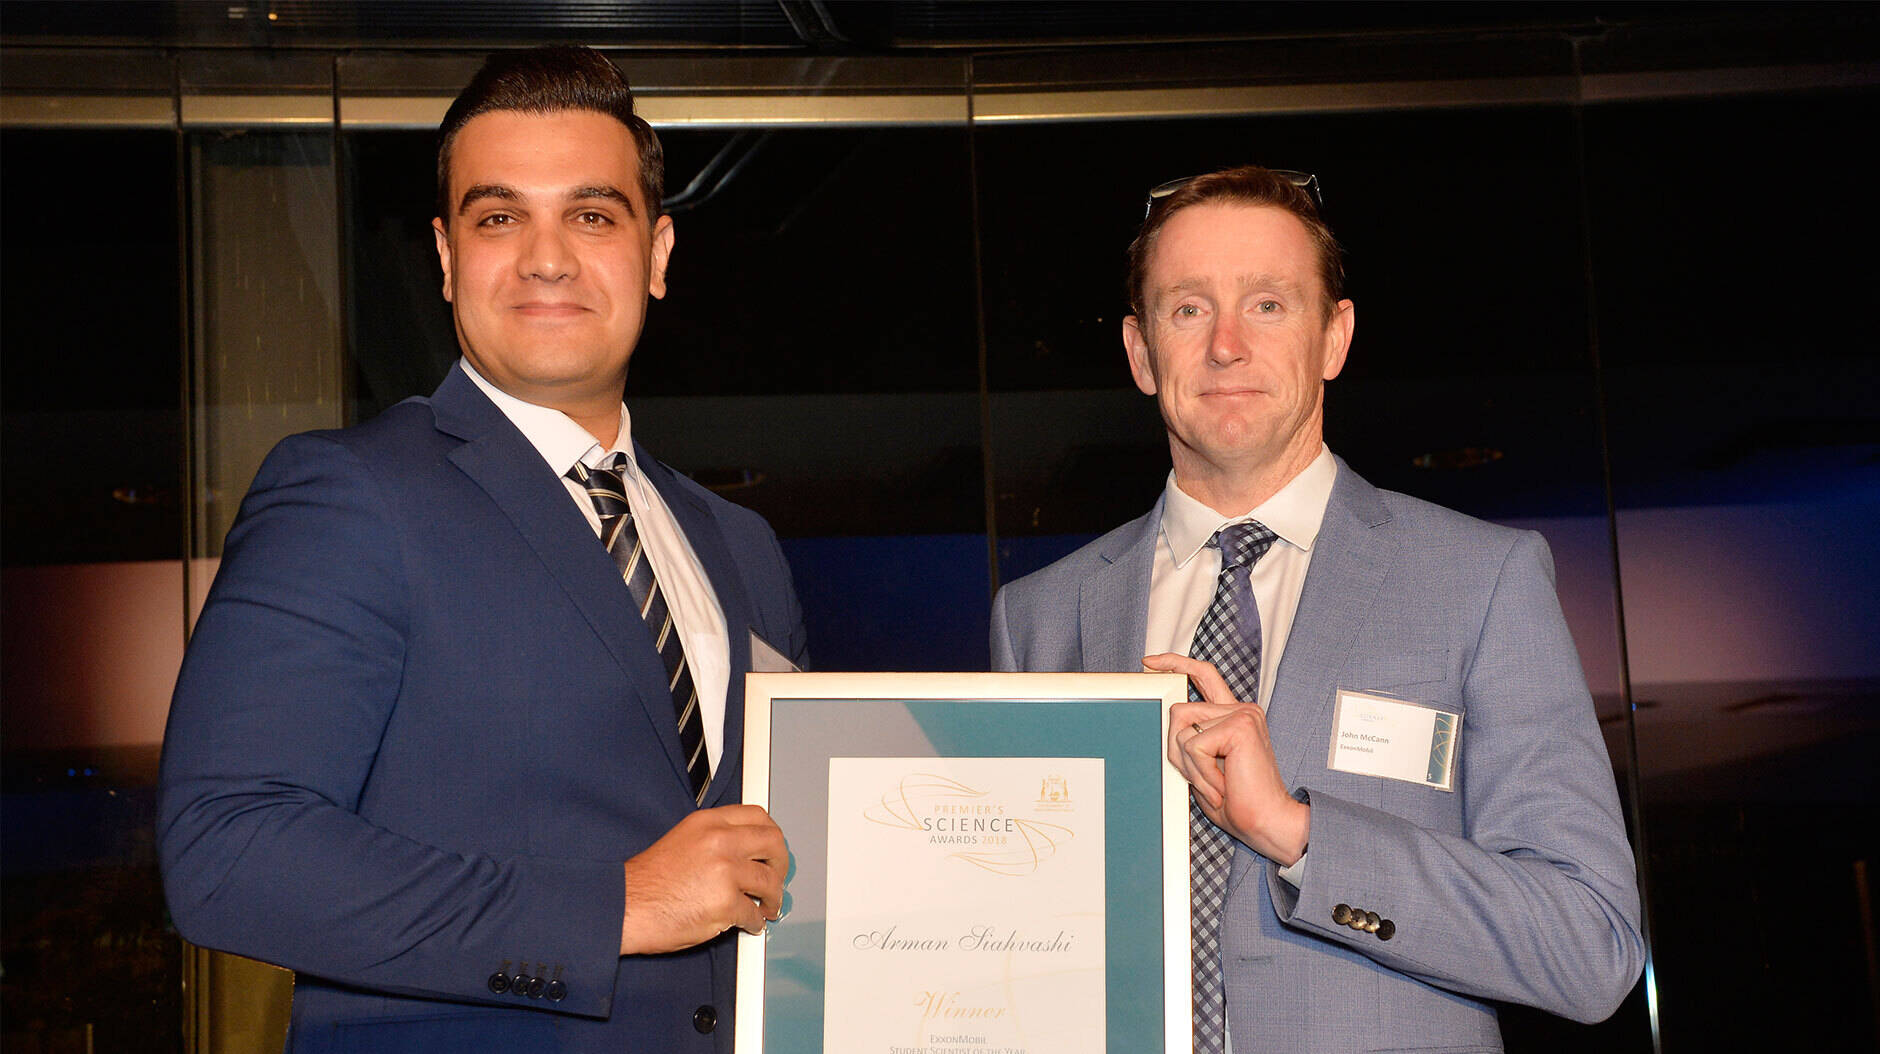 Image Photo  ExxonMobil's Joint Interest Manager, John McCann, presents the Student Scientist of the Year 2018 award to joint winner Arman Siahvashi.